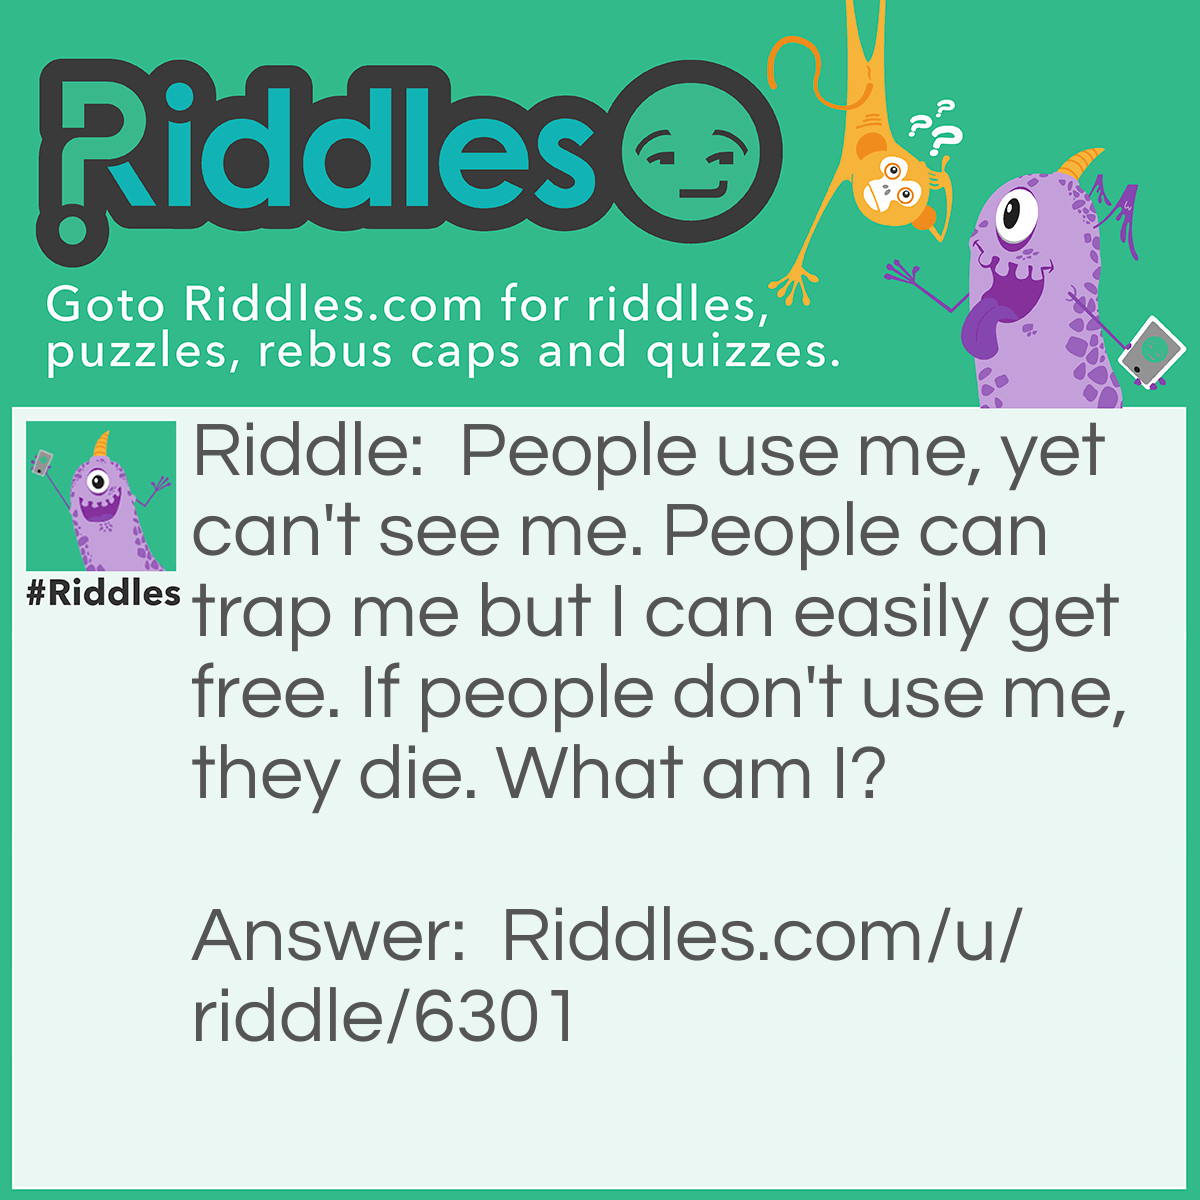 Riddle: People use me, yet can't see me. People can trap me but I can easily get free. If people don't use me, they die. What am I? Answer: Air.